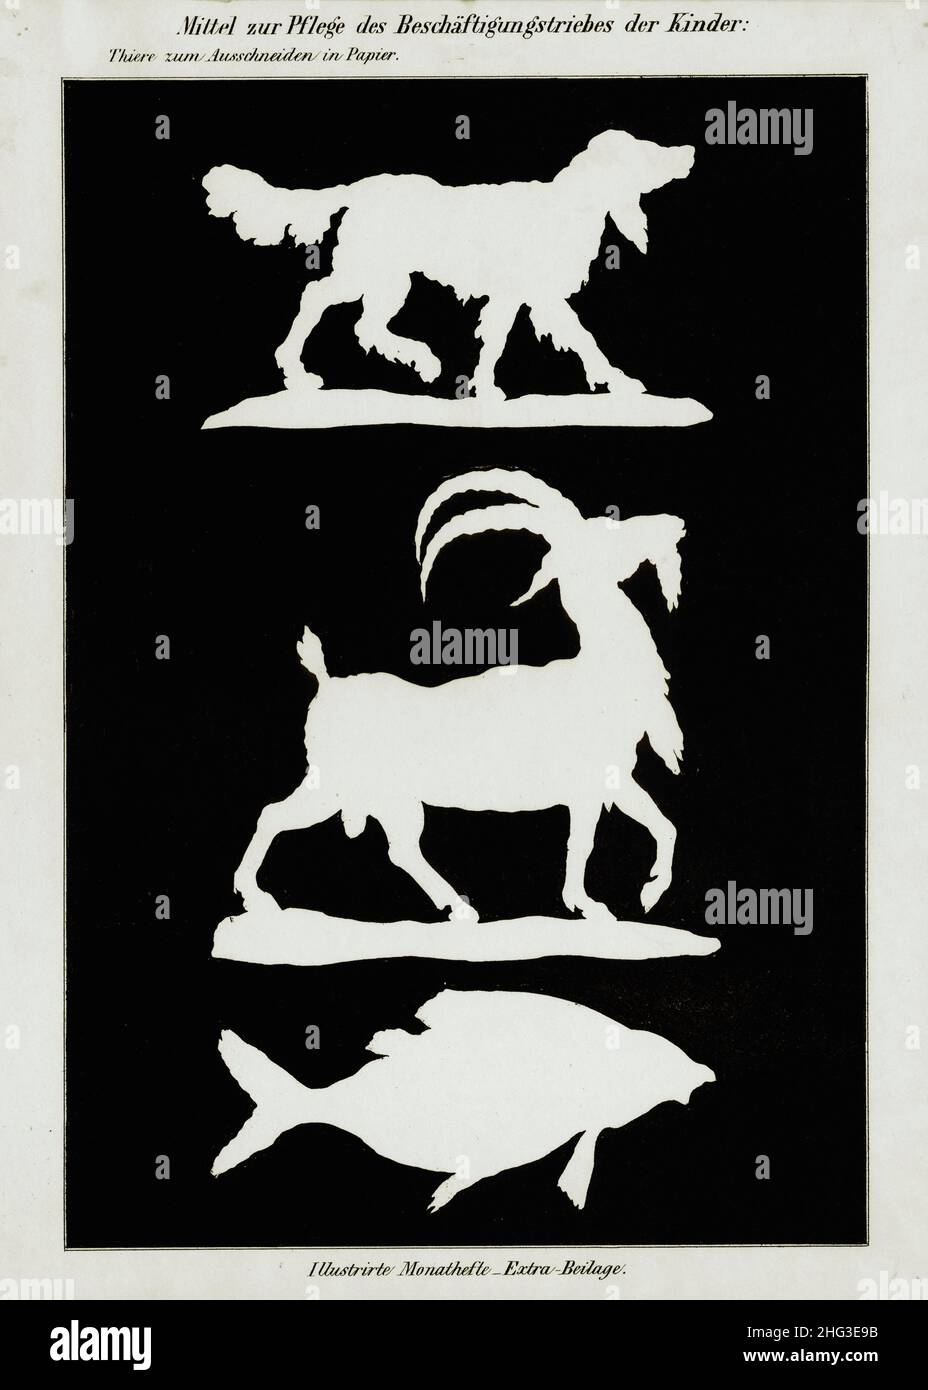 19th century paper print of animals and fish for cutting out. Means for caring for children's employment instinct: animals for cutting out in paper. G Stock Photo